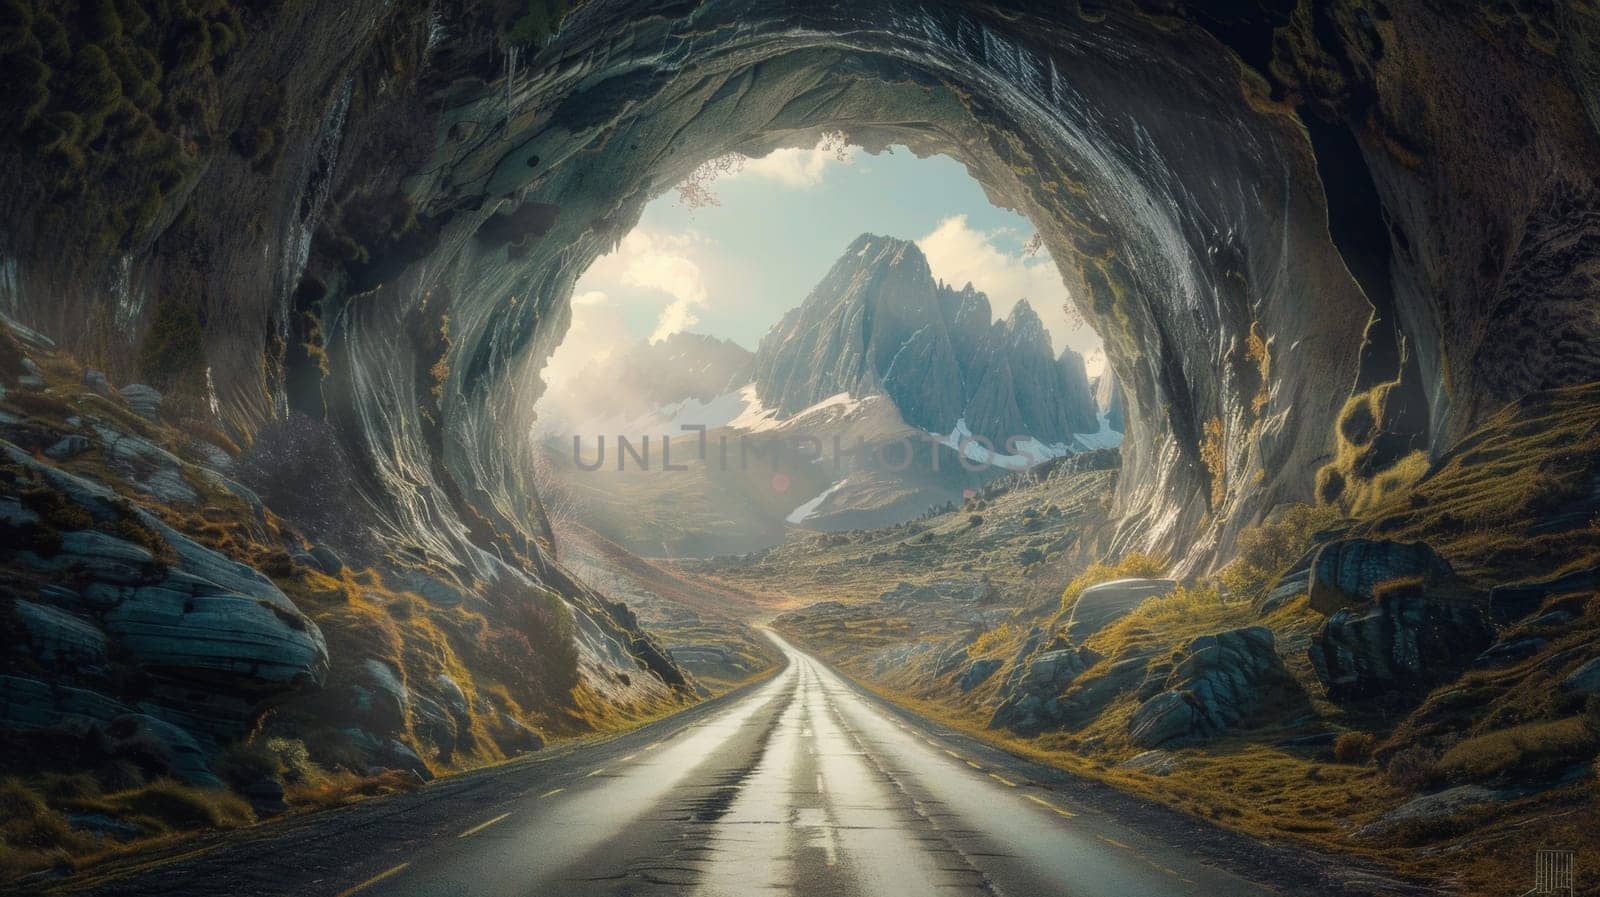 A road leading into a tunnel with mountains in the background